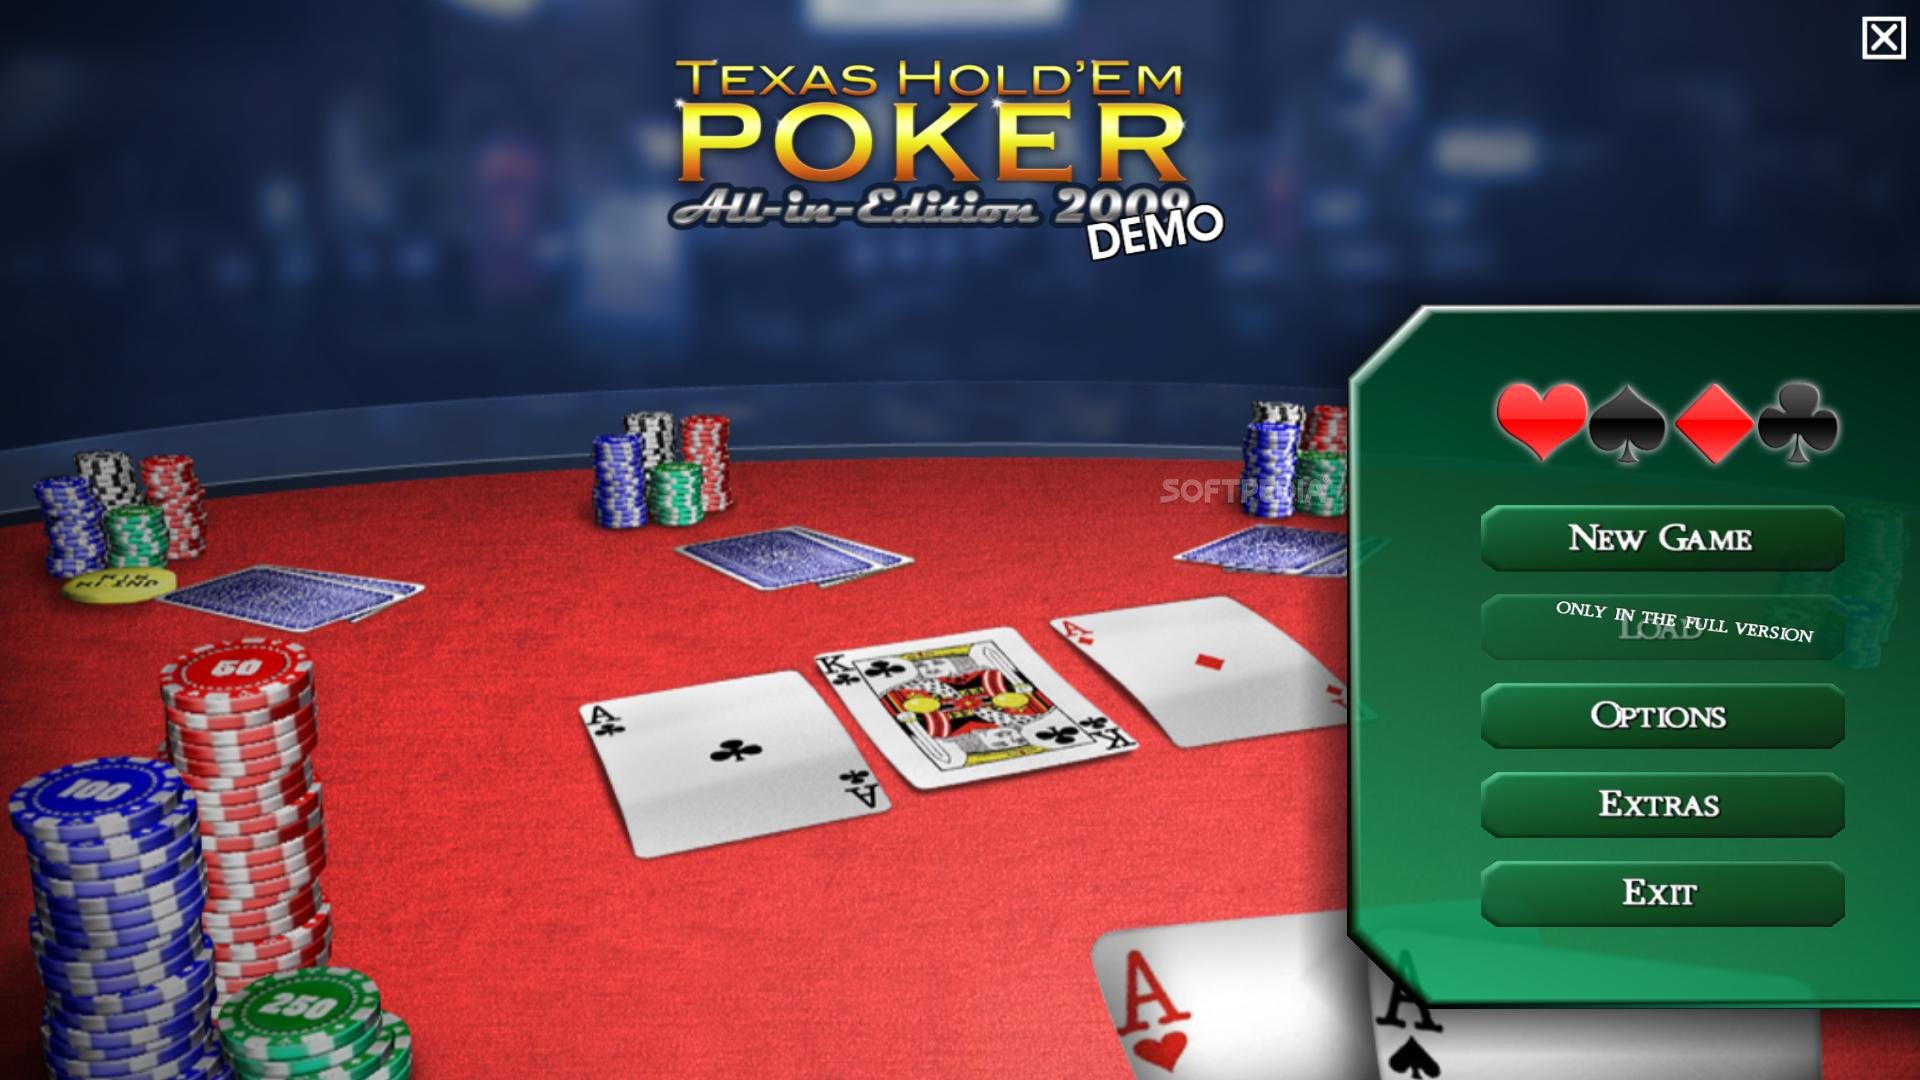 Restrict mouse disinfect Texas Hold'em Poker All-in-Edition 2009 Demo Download